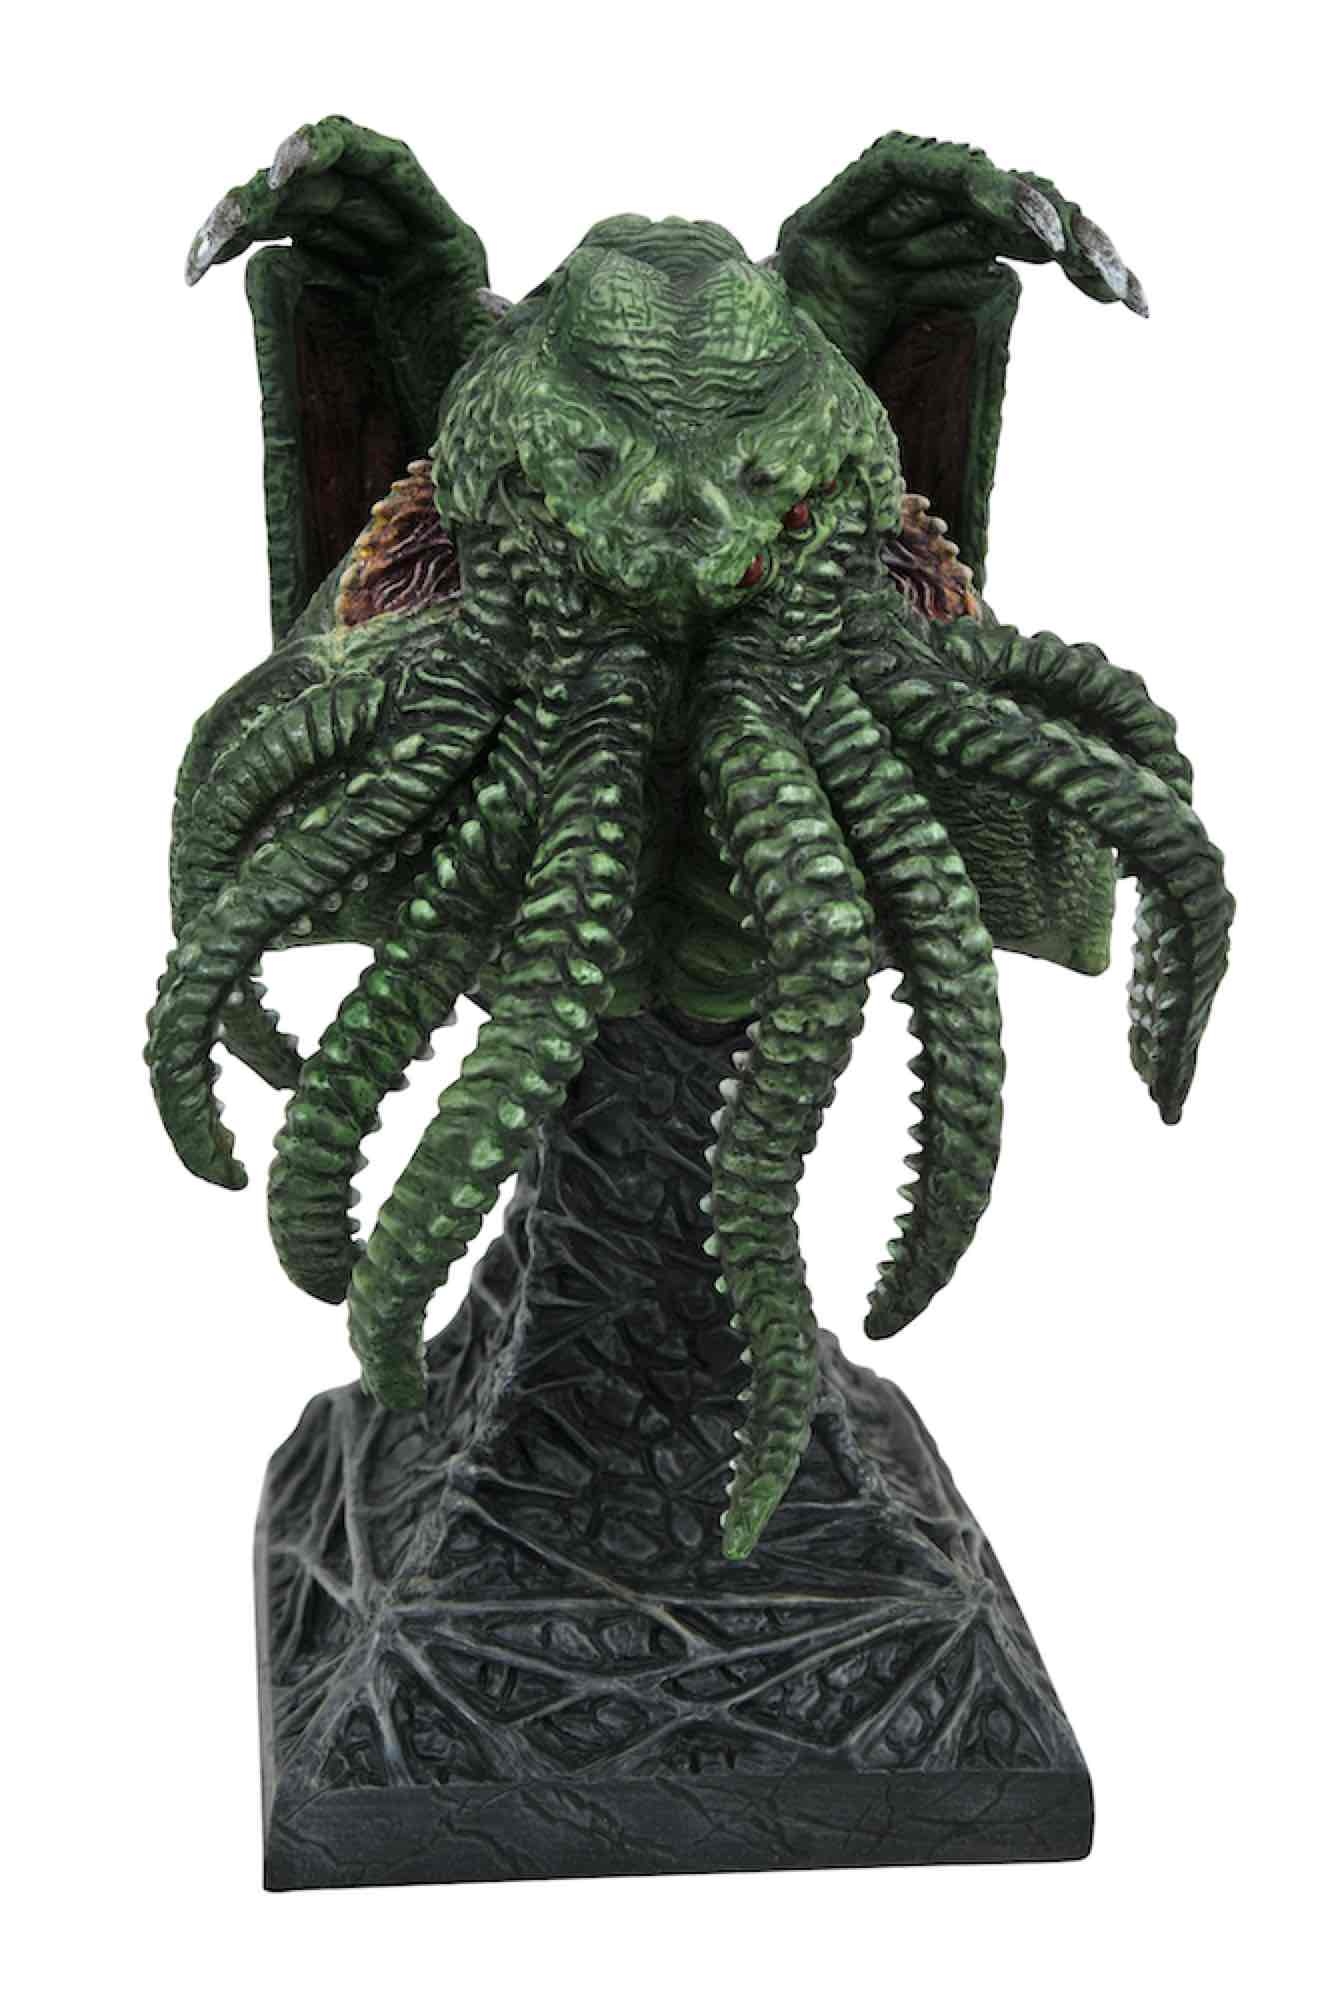 CTHULHU BUSTO RESINA 25 CM 1/2 SCALE LEGENDS IN 3D CTHULHU